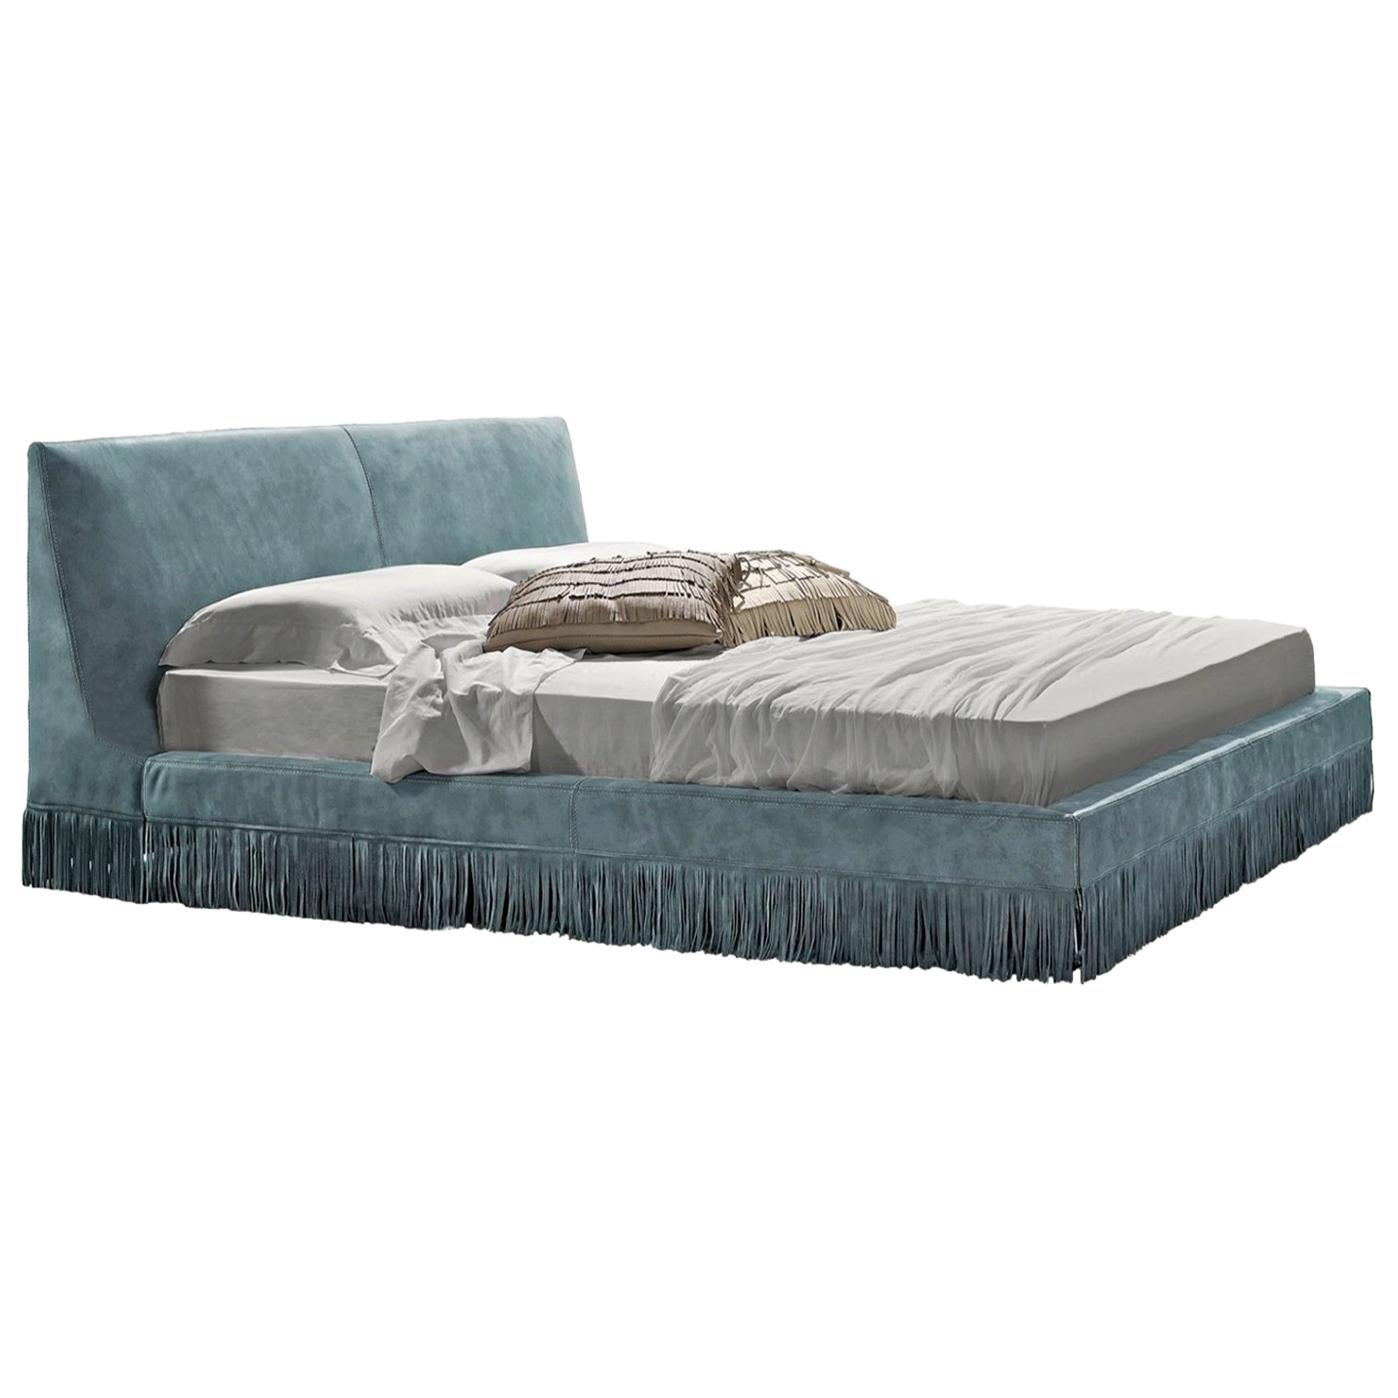 Italian Leather King Sized Bed - Haute Couture with Fringe Skirt Details